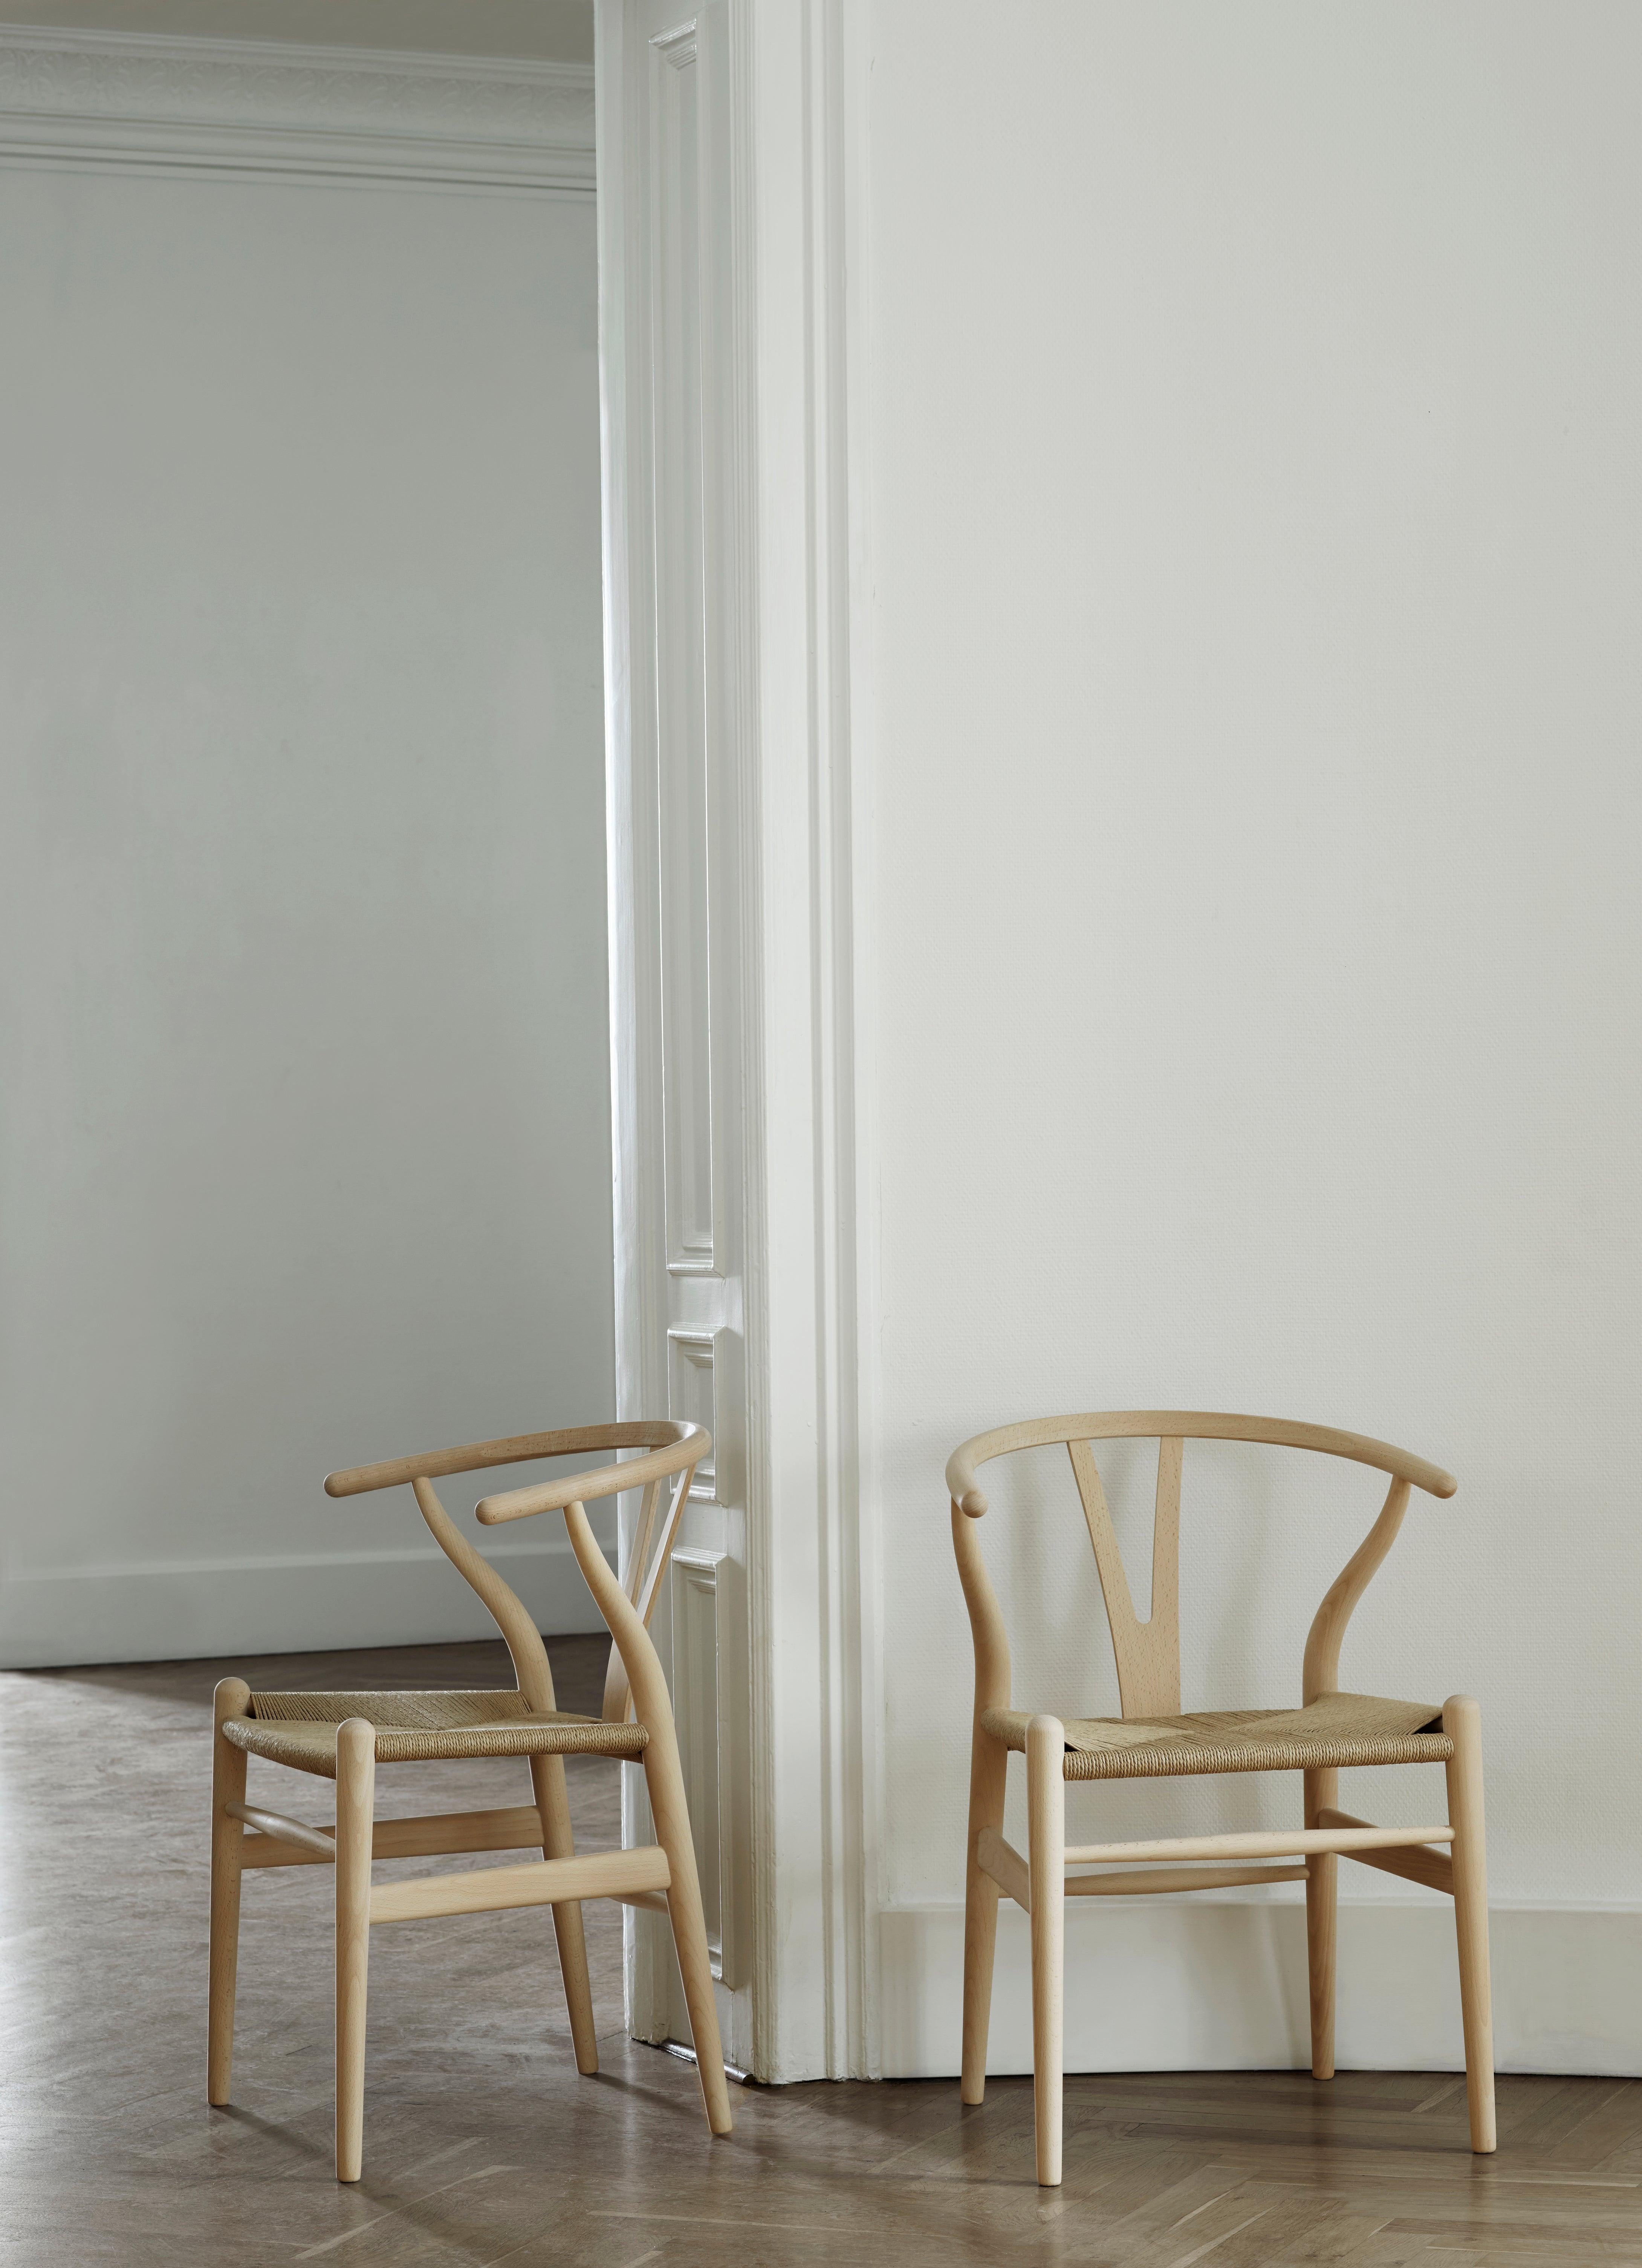 Woven CH24 Wishbone Chair in Walnut Oil with Natural Papercord Seat by Hans Wegner